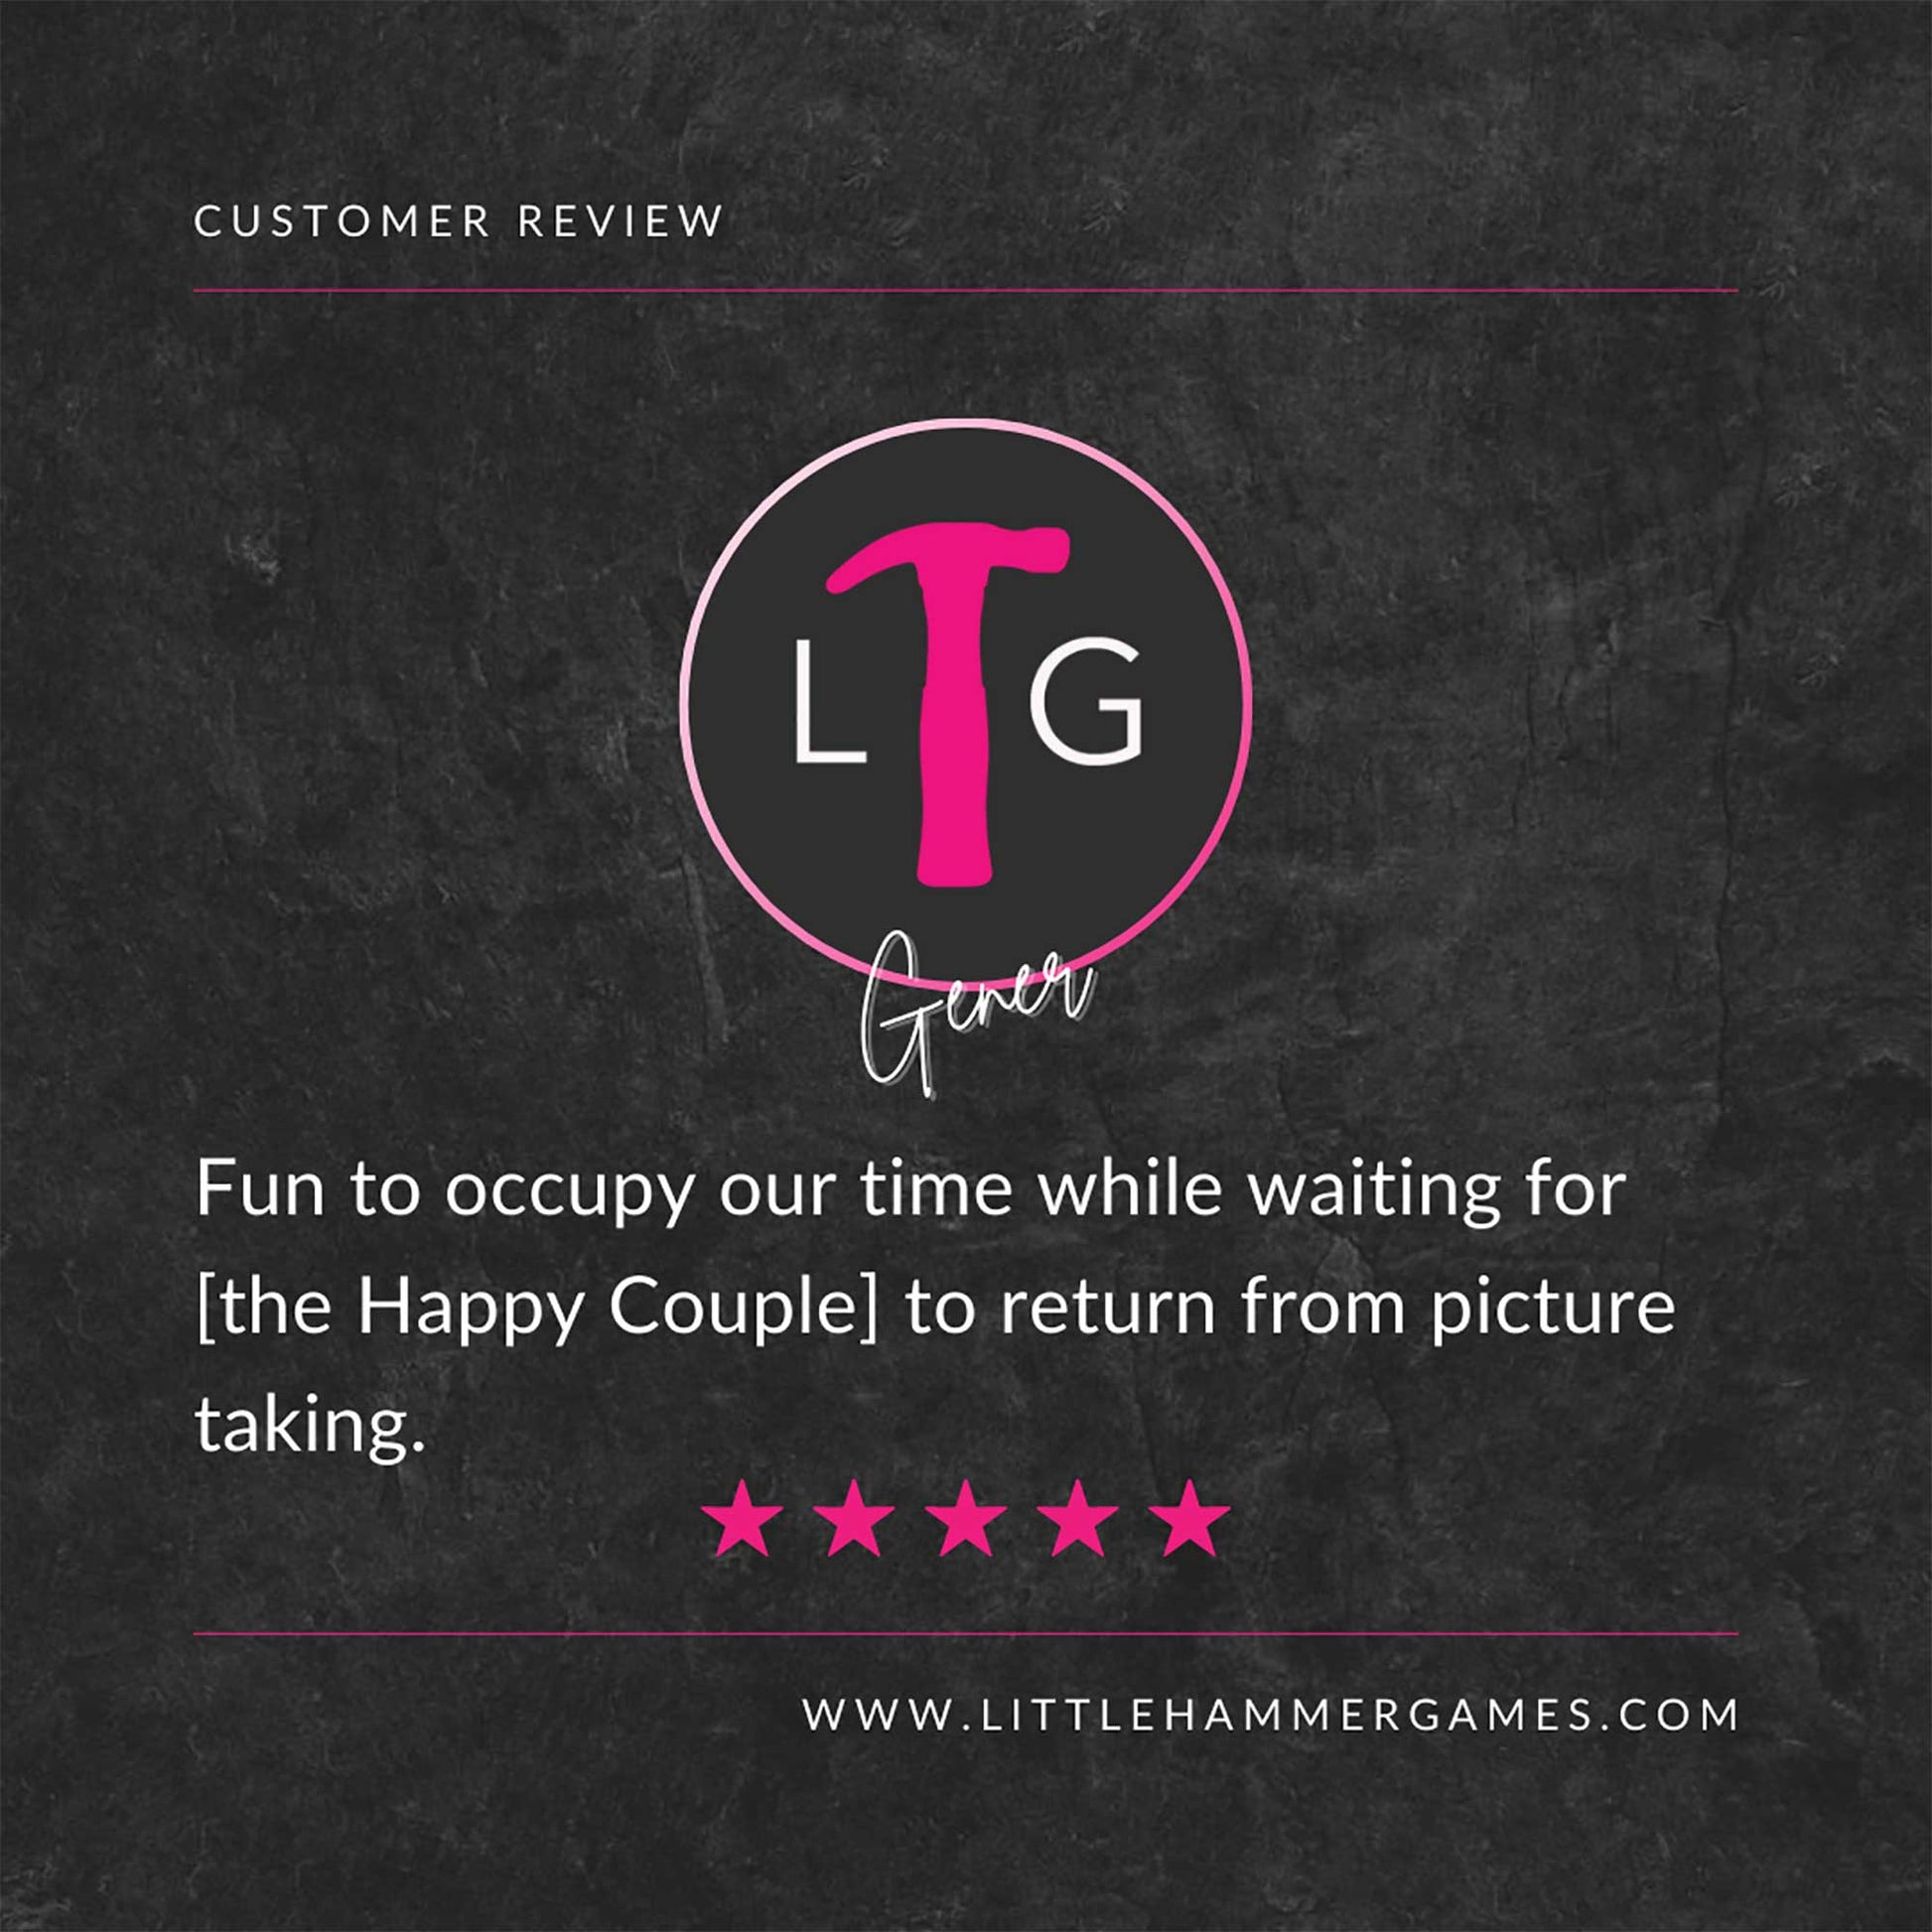 White and pink text on a slate background with a 5-star review that says "Fun to occupy our time while waiting for [the Happy Couple] to return from picture taking